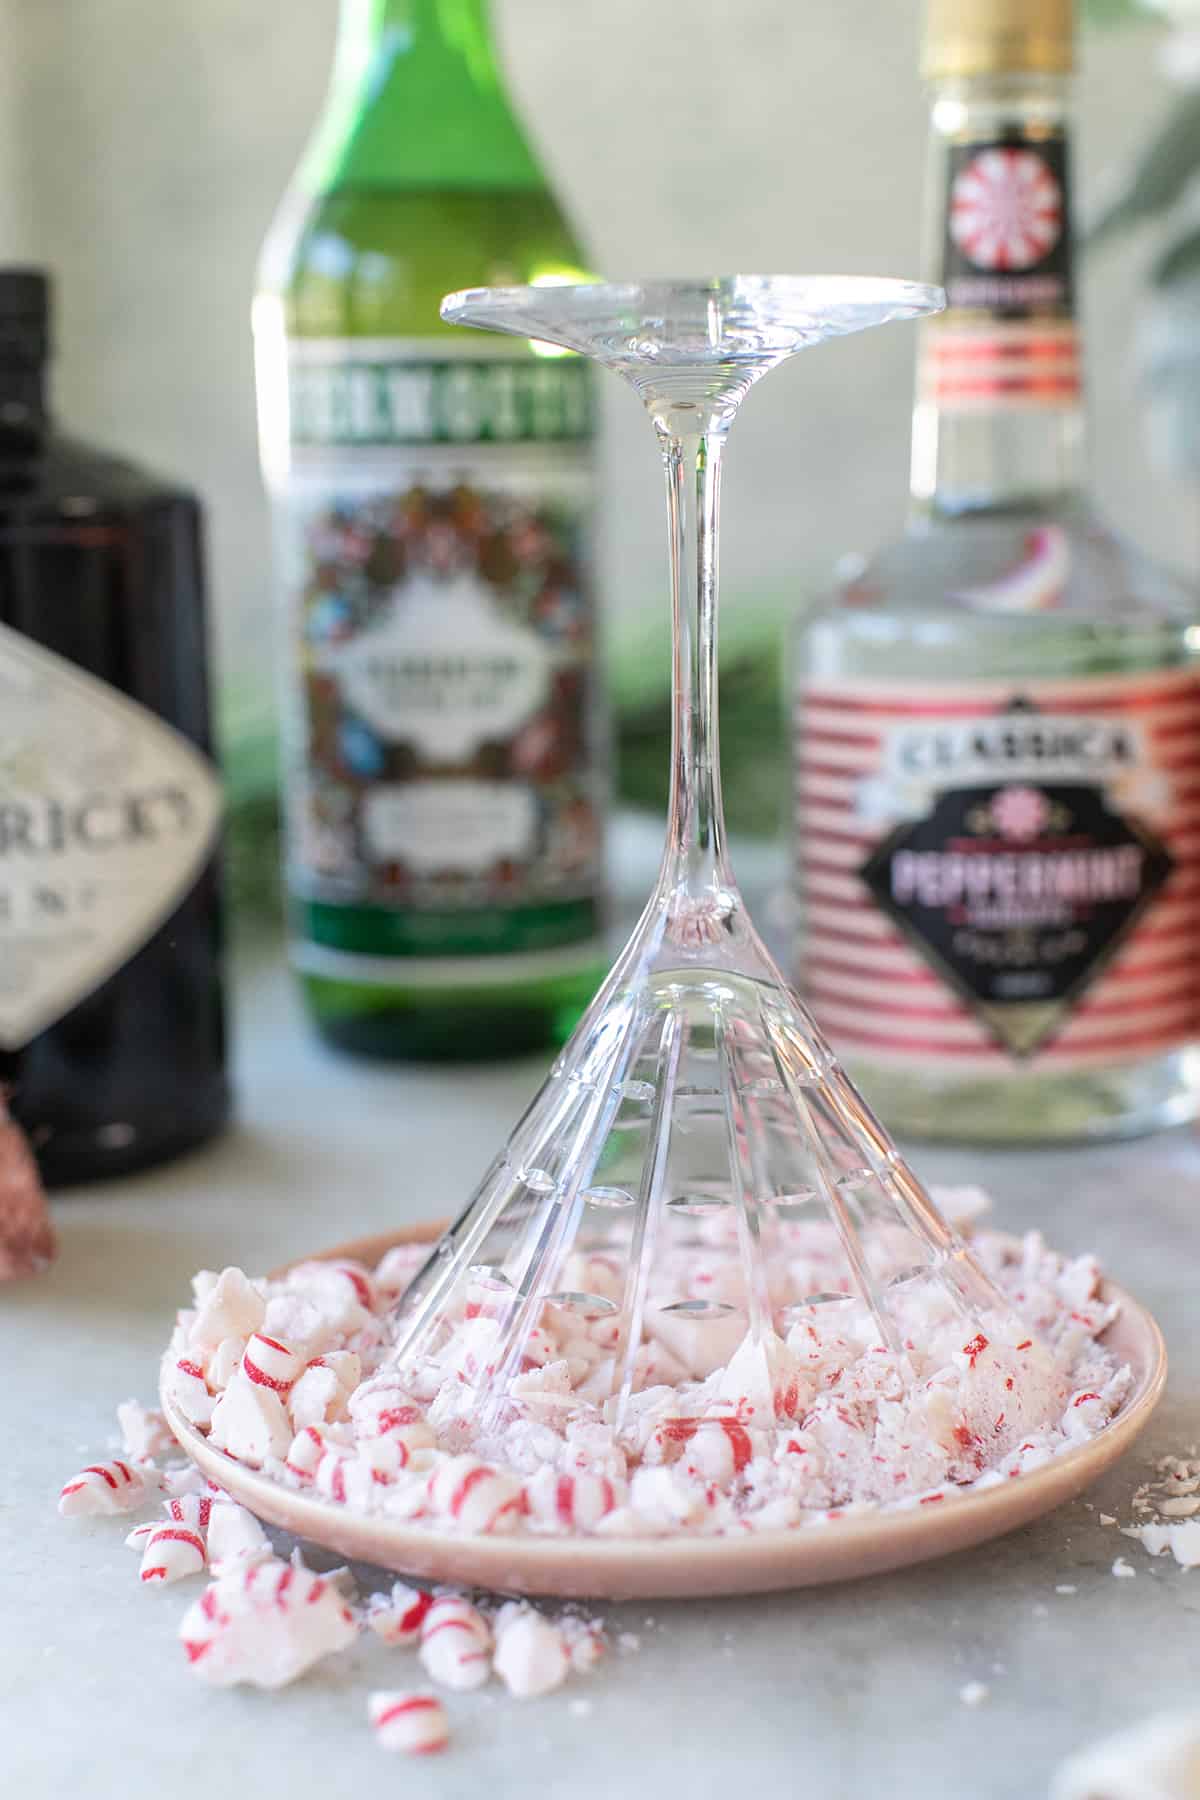 riming a martini glass glass with crushed candy canes - chocolate peppermint martini, crushed peppermint, peppermint candies